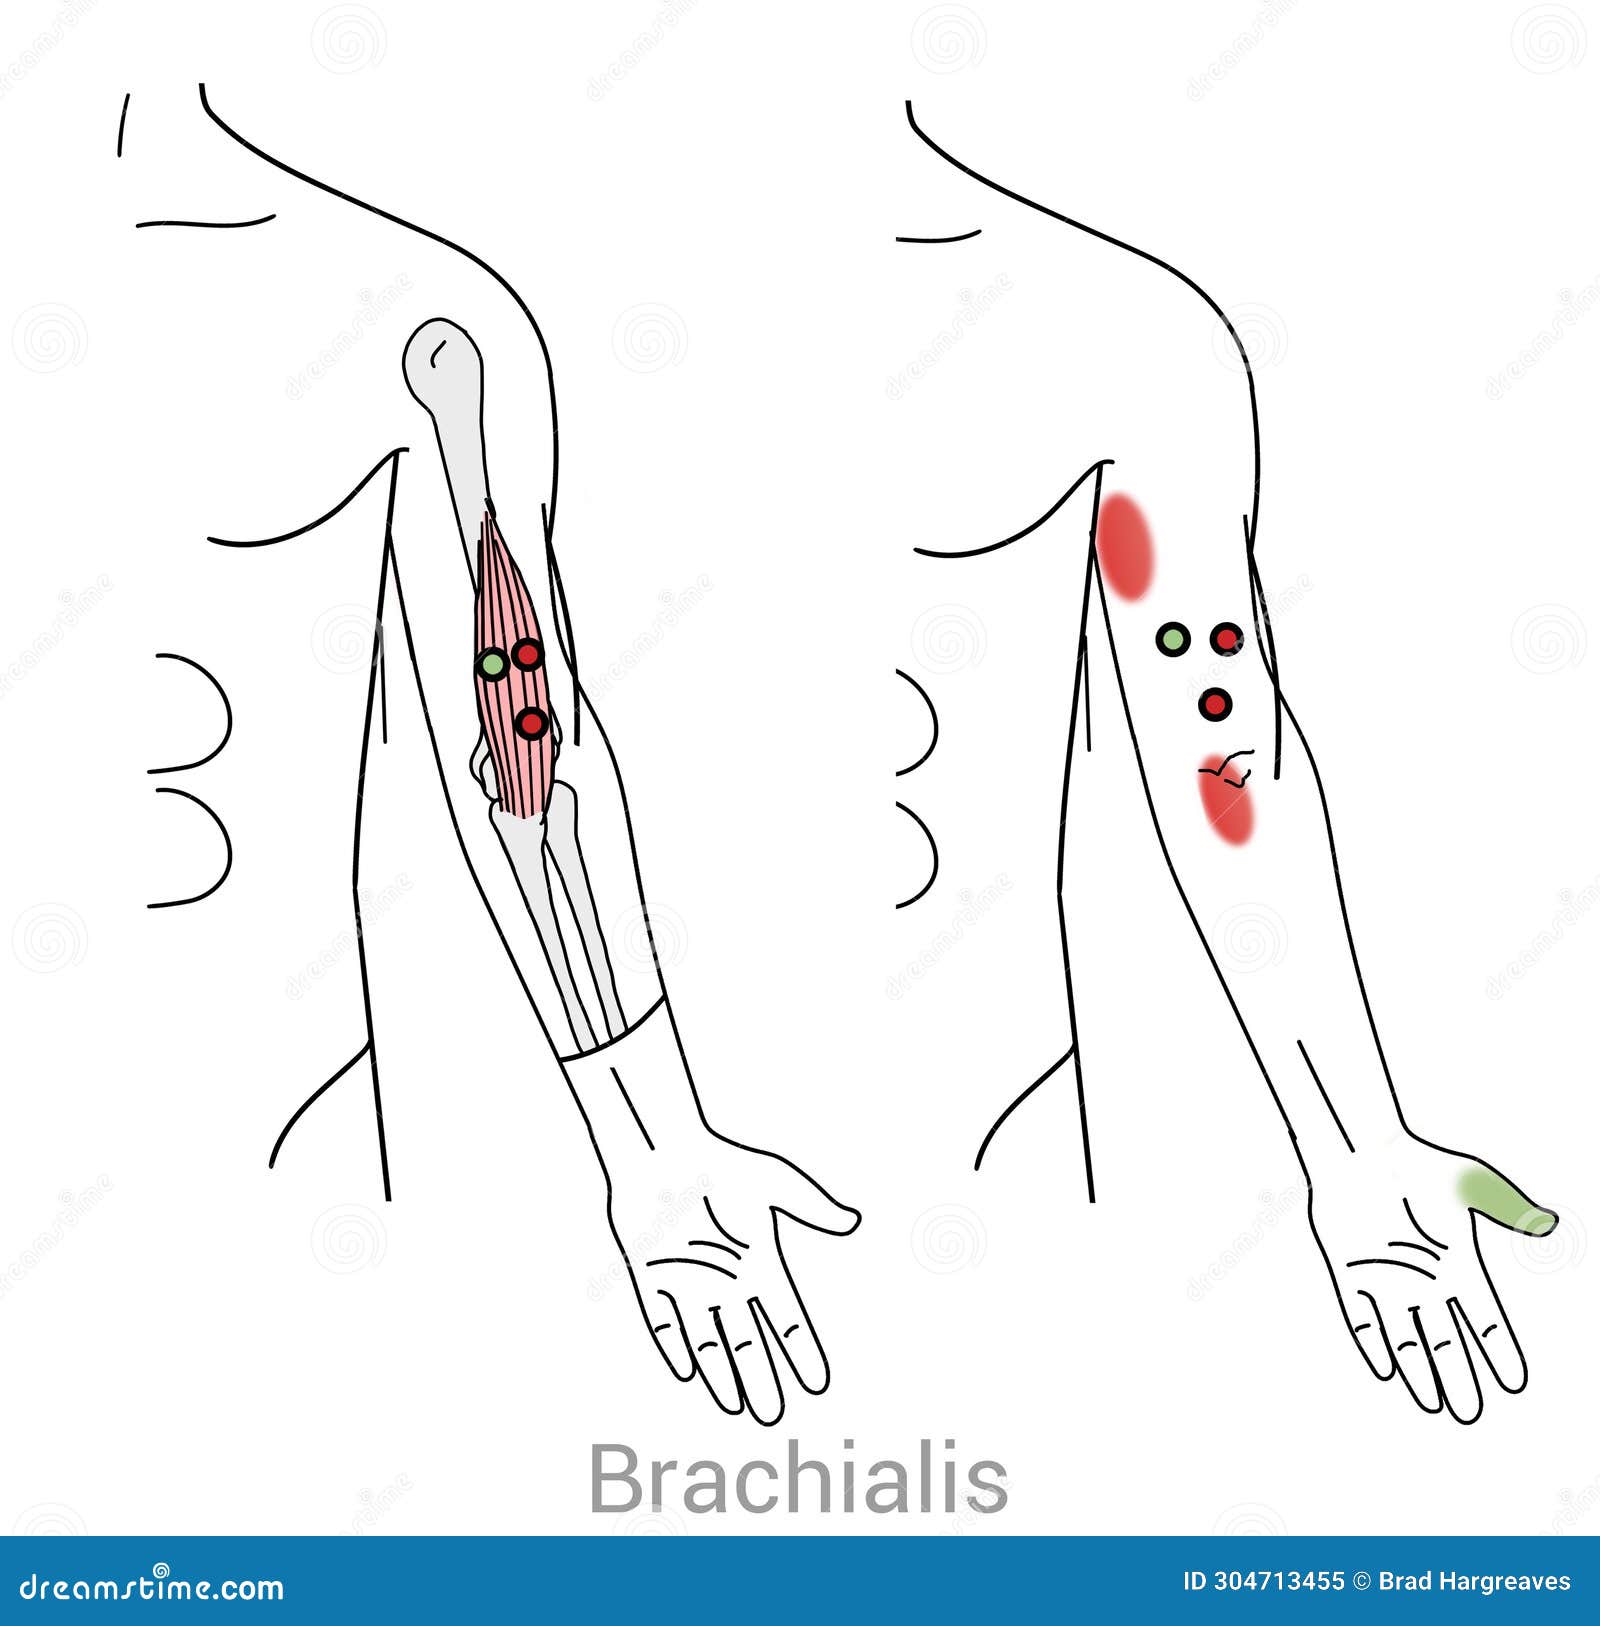 brachialis trigger points and upper arm pain